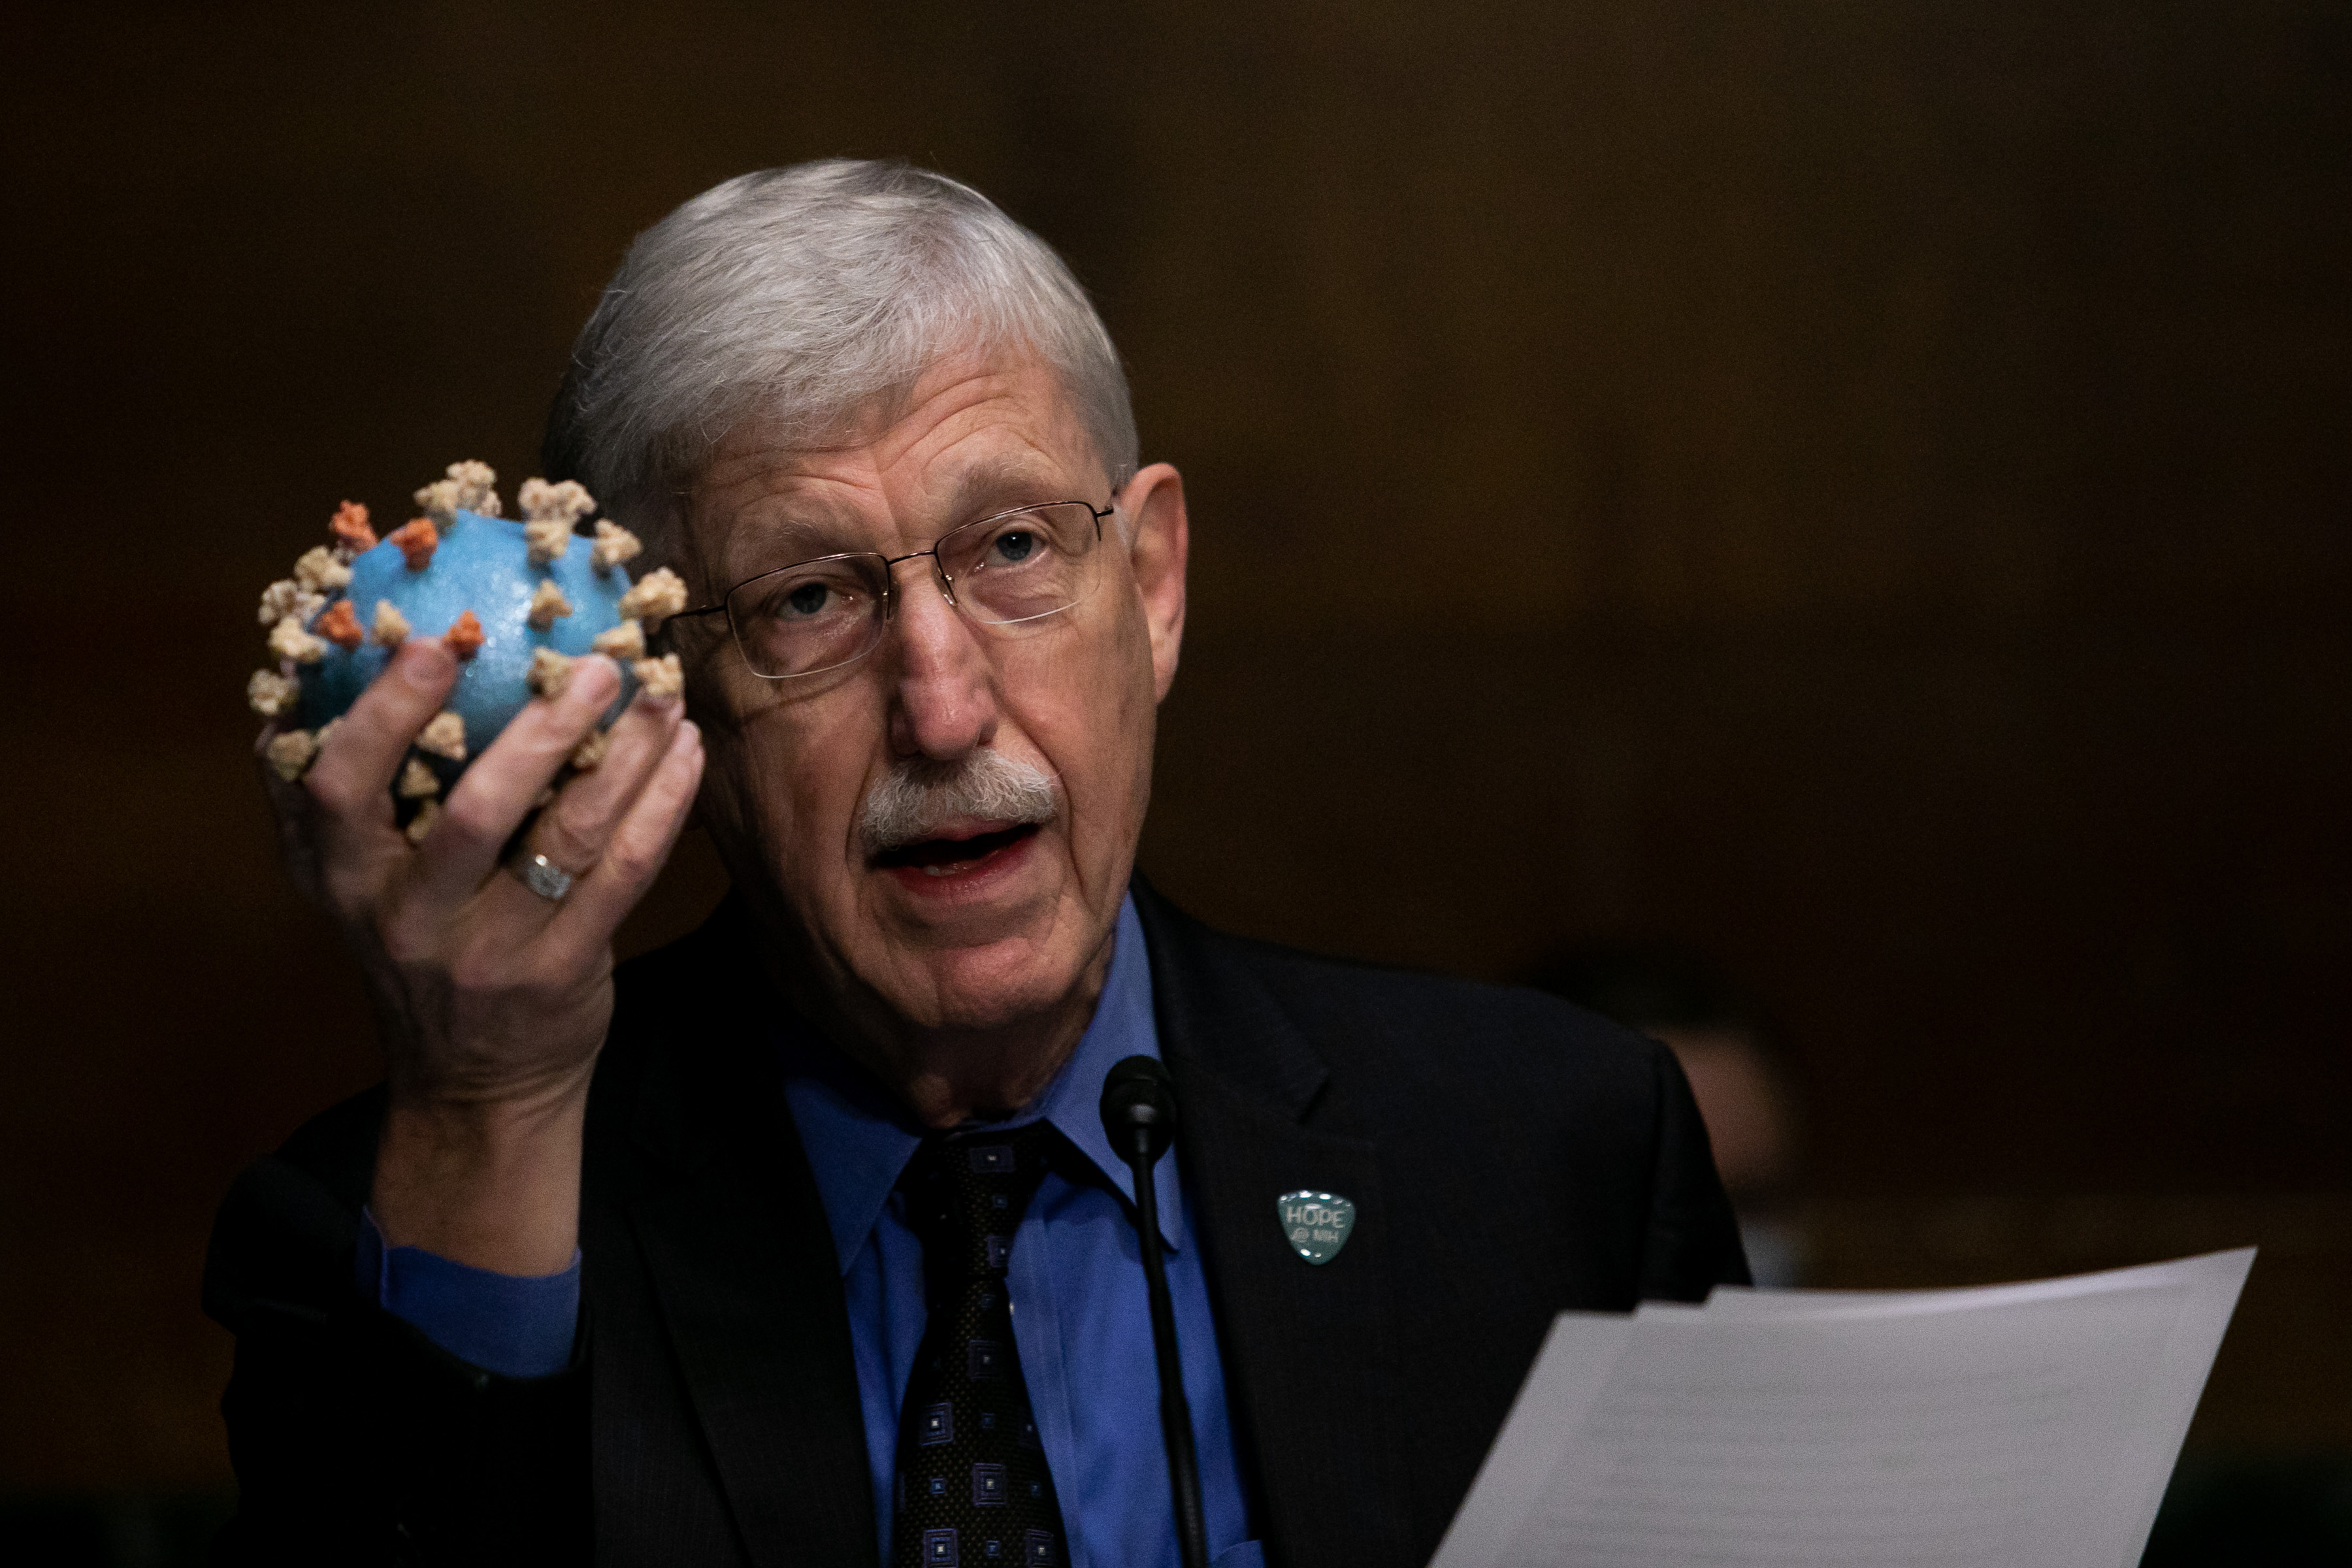 National Health Institute Director Francis S. Collins holds a model of a Coronavirus, as he testifies at a Senate hearing July 2, 2020 in Washington, DC. (Photo: Graeme Jennings-Pool/Getty Images)